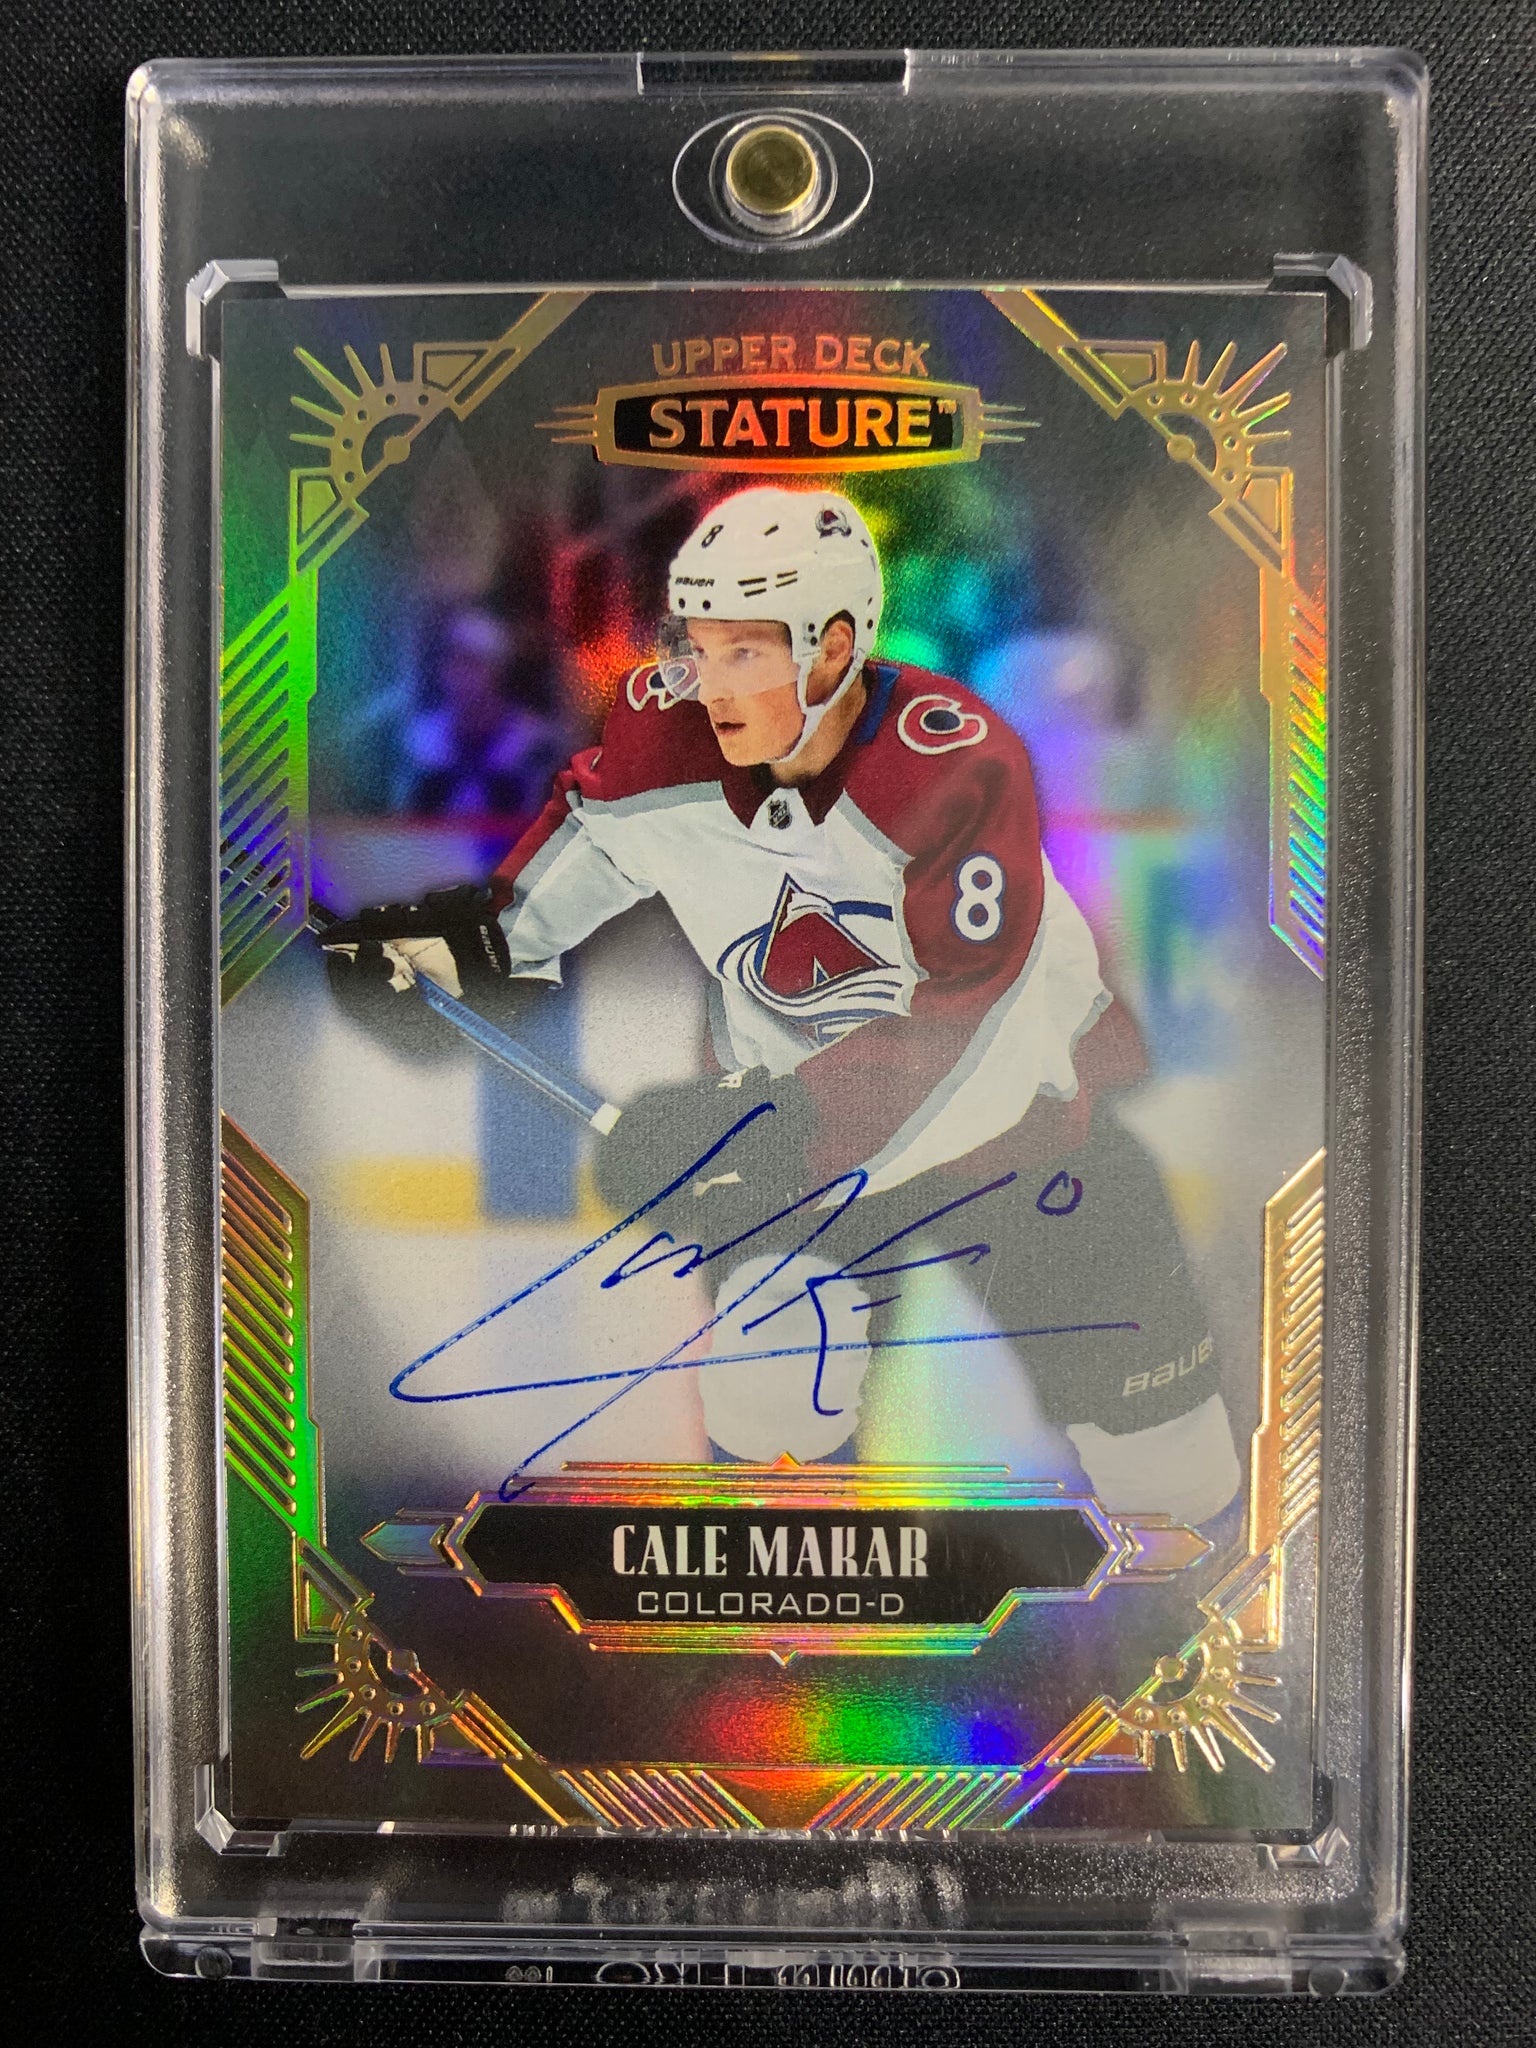 2020-21 UPPER DECK STATURE HOCKEY #17 COLORADO AVALANCHE - CALE MAKAR STATURE ON CARD AUTOGRAPH